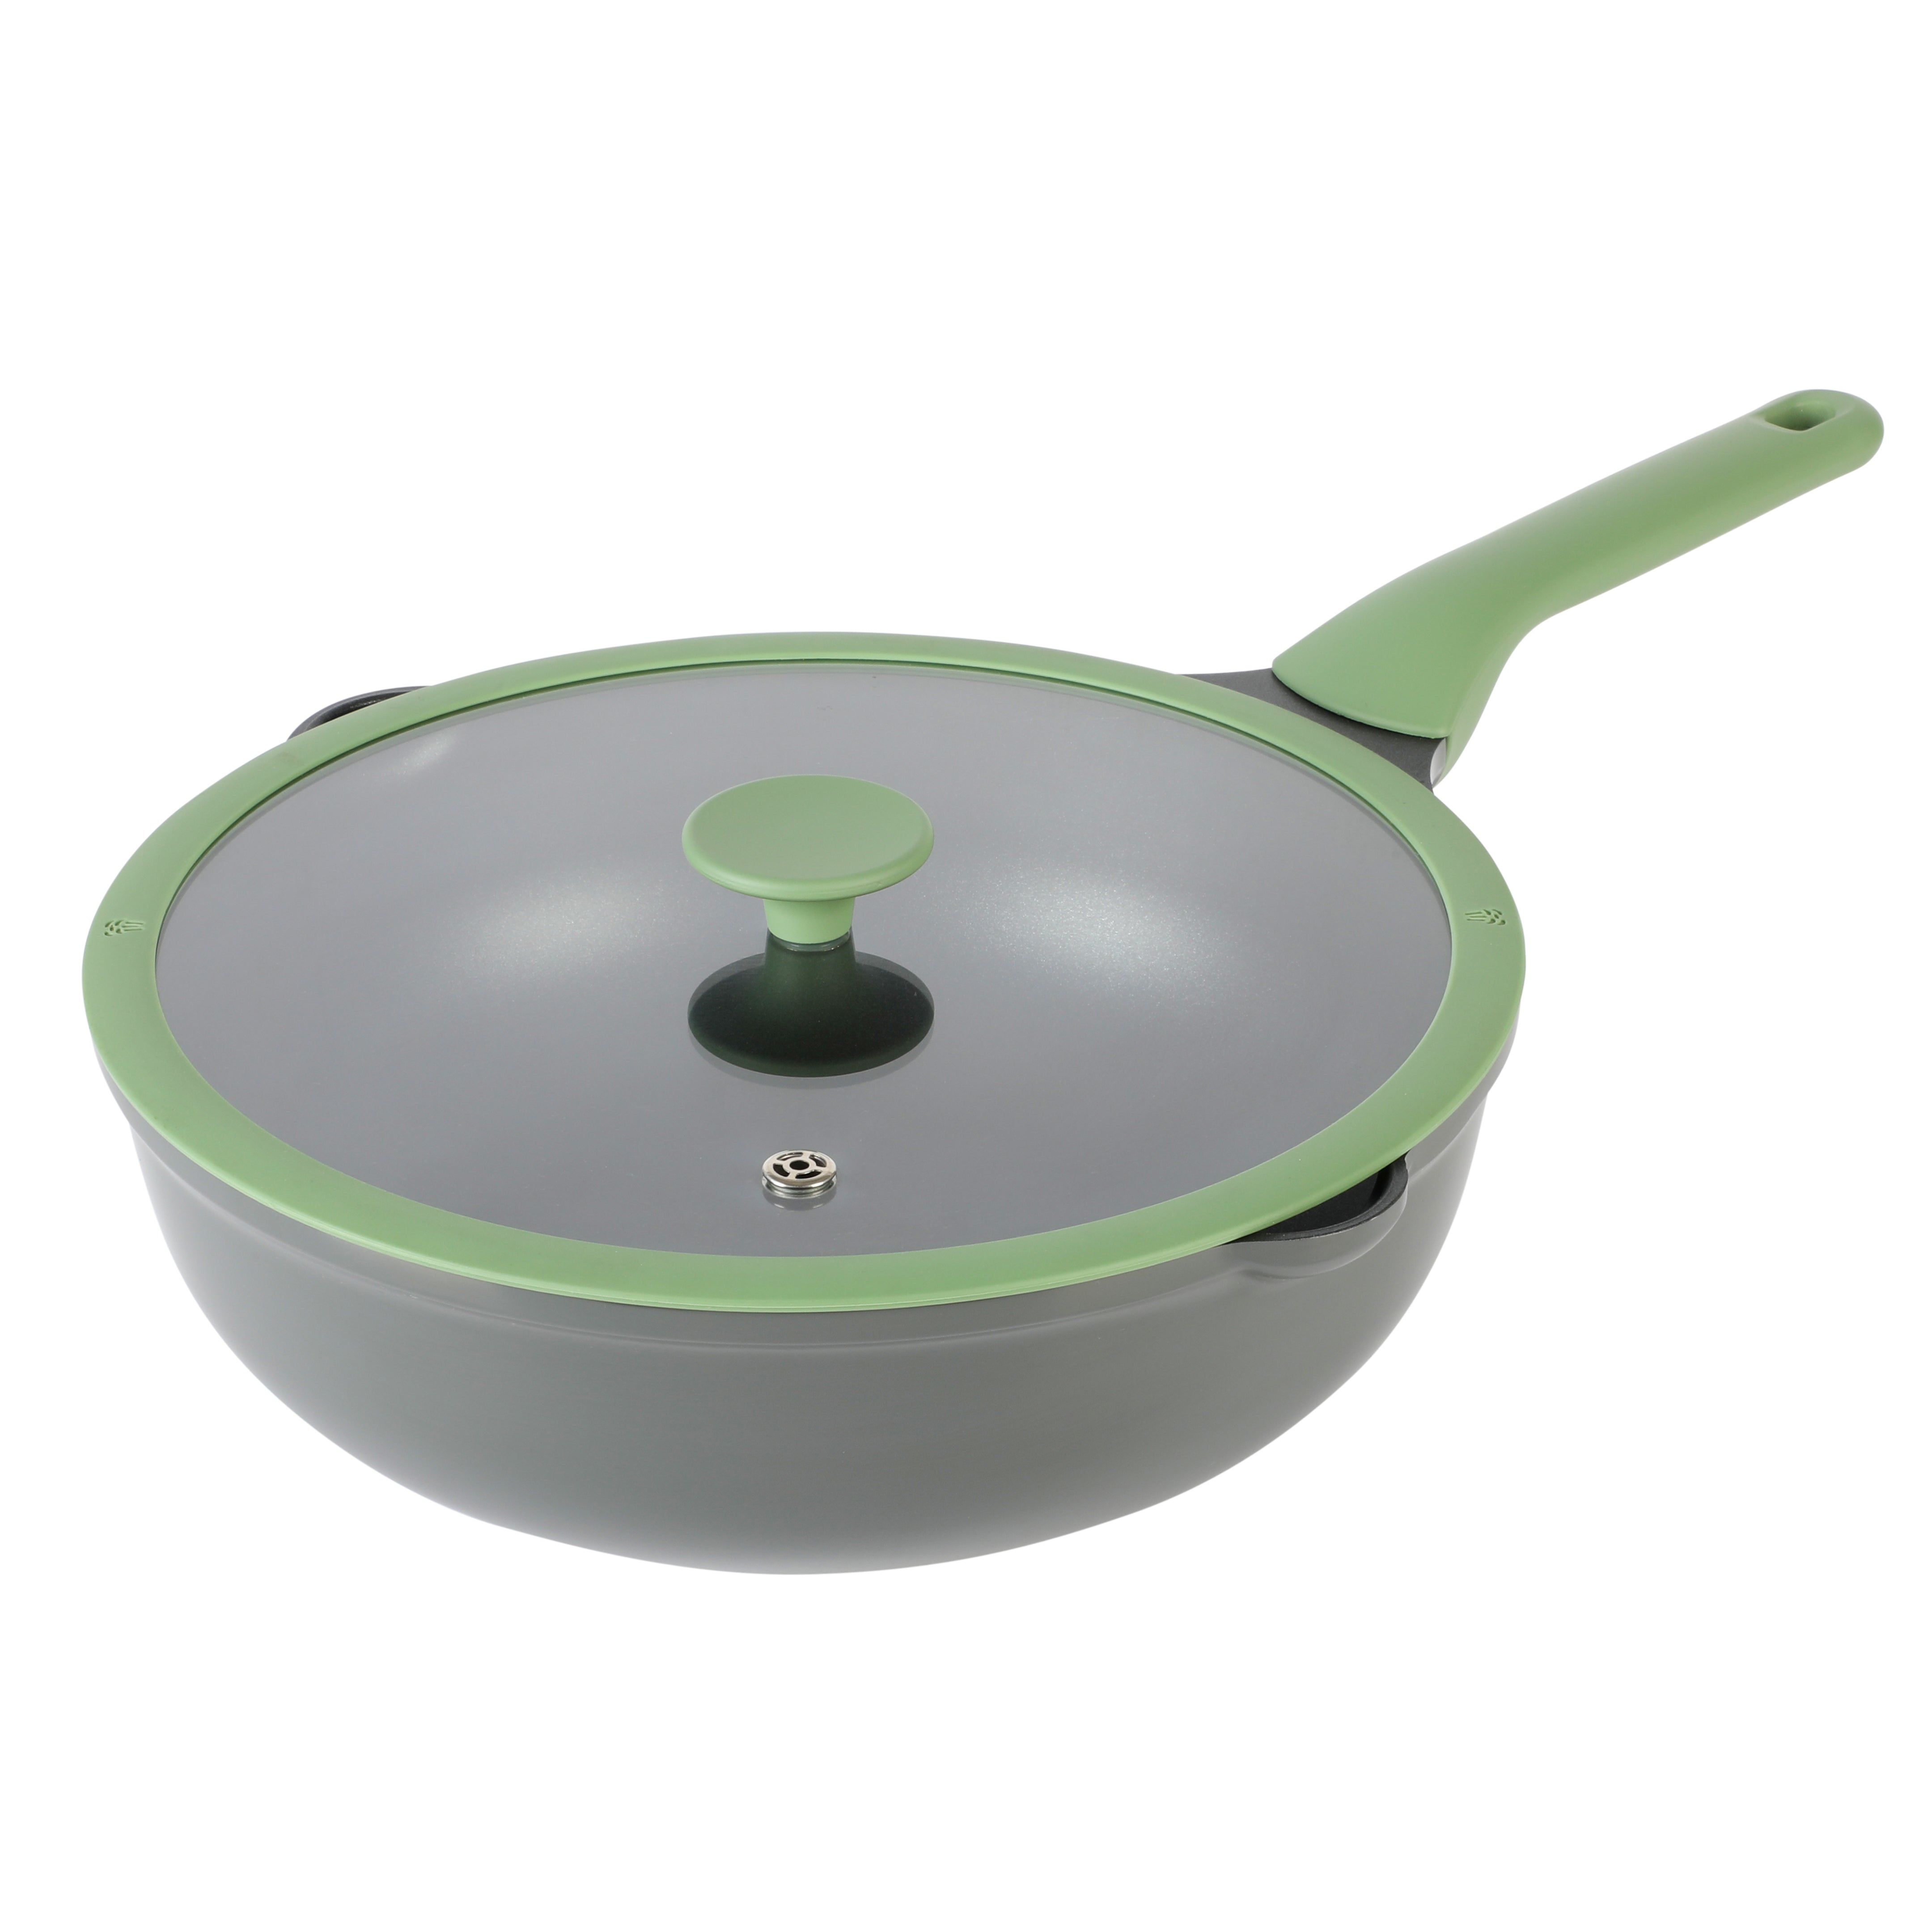 Kenmore Theodore 13" Cast Aluminum Saute Pan w/ Lid Nonstick Interior and Induction Base